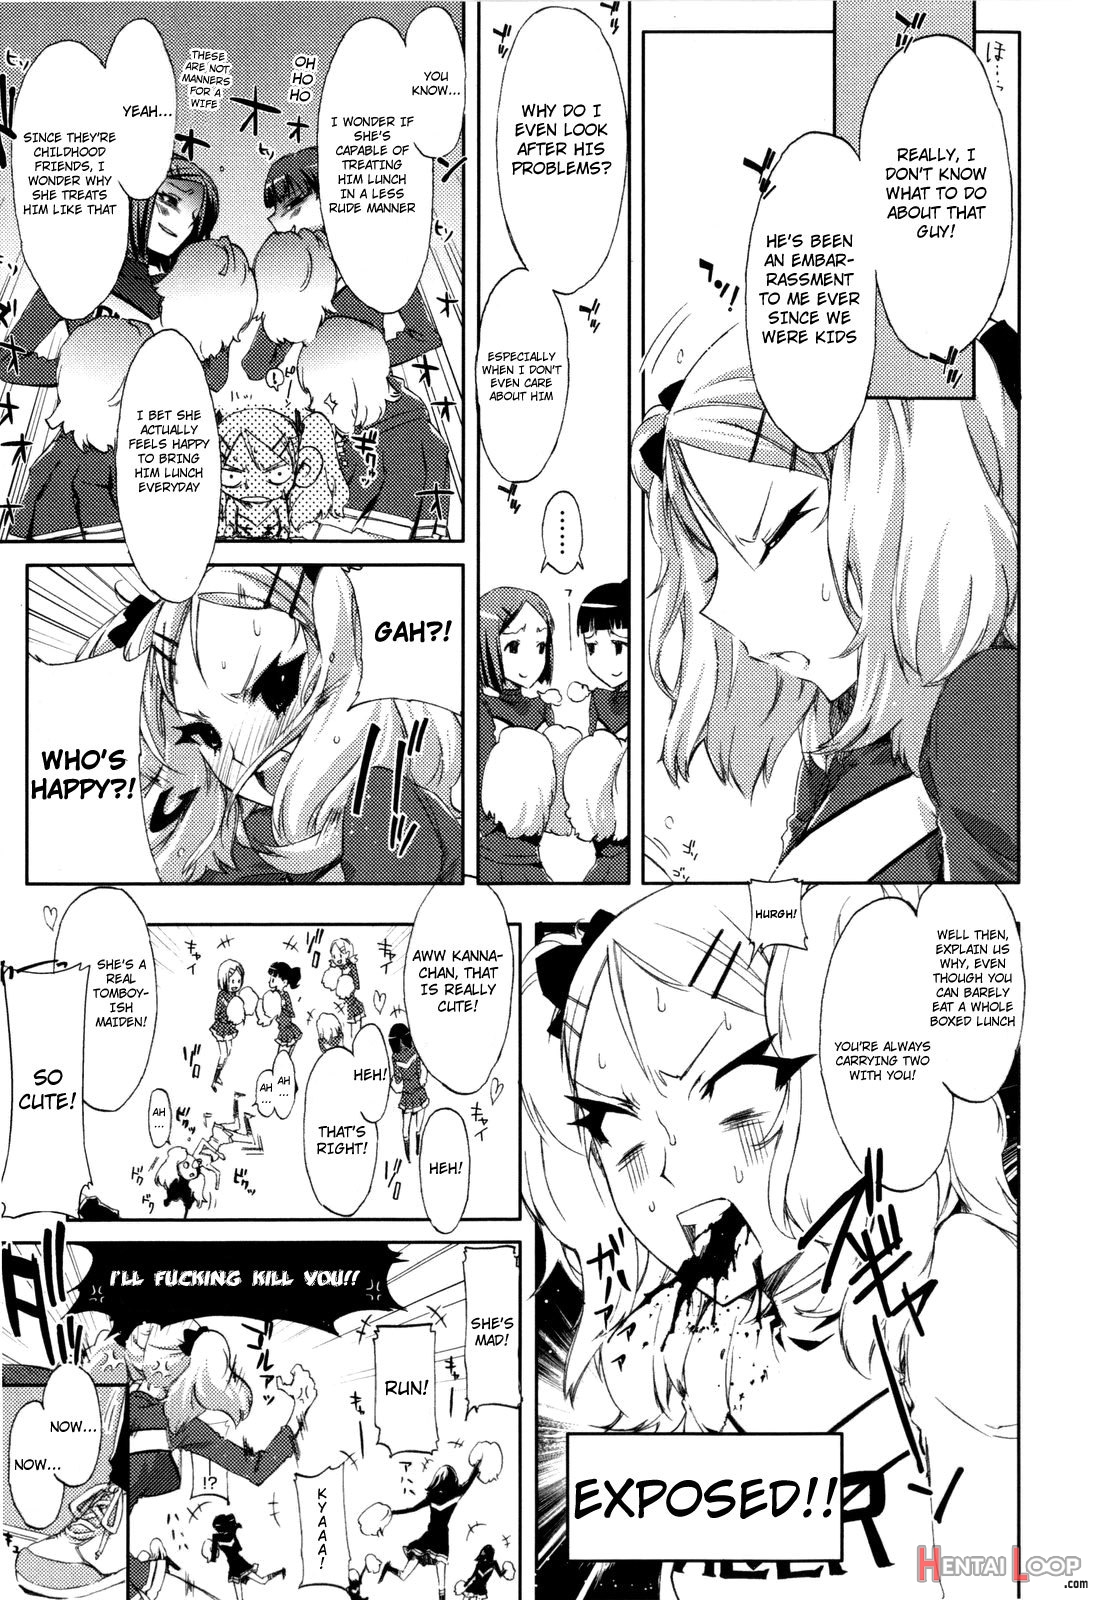 Cheerism page 13